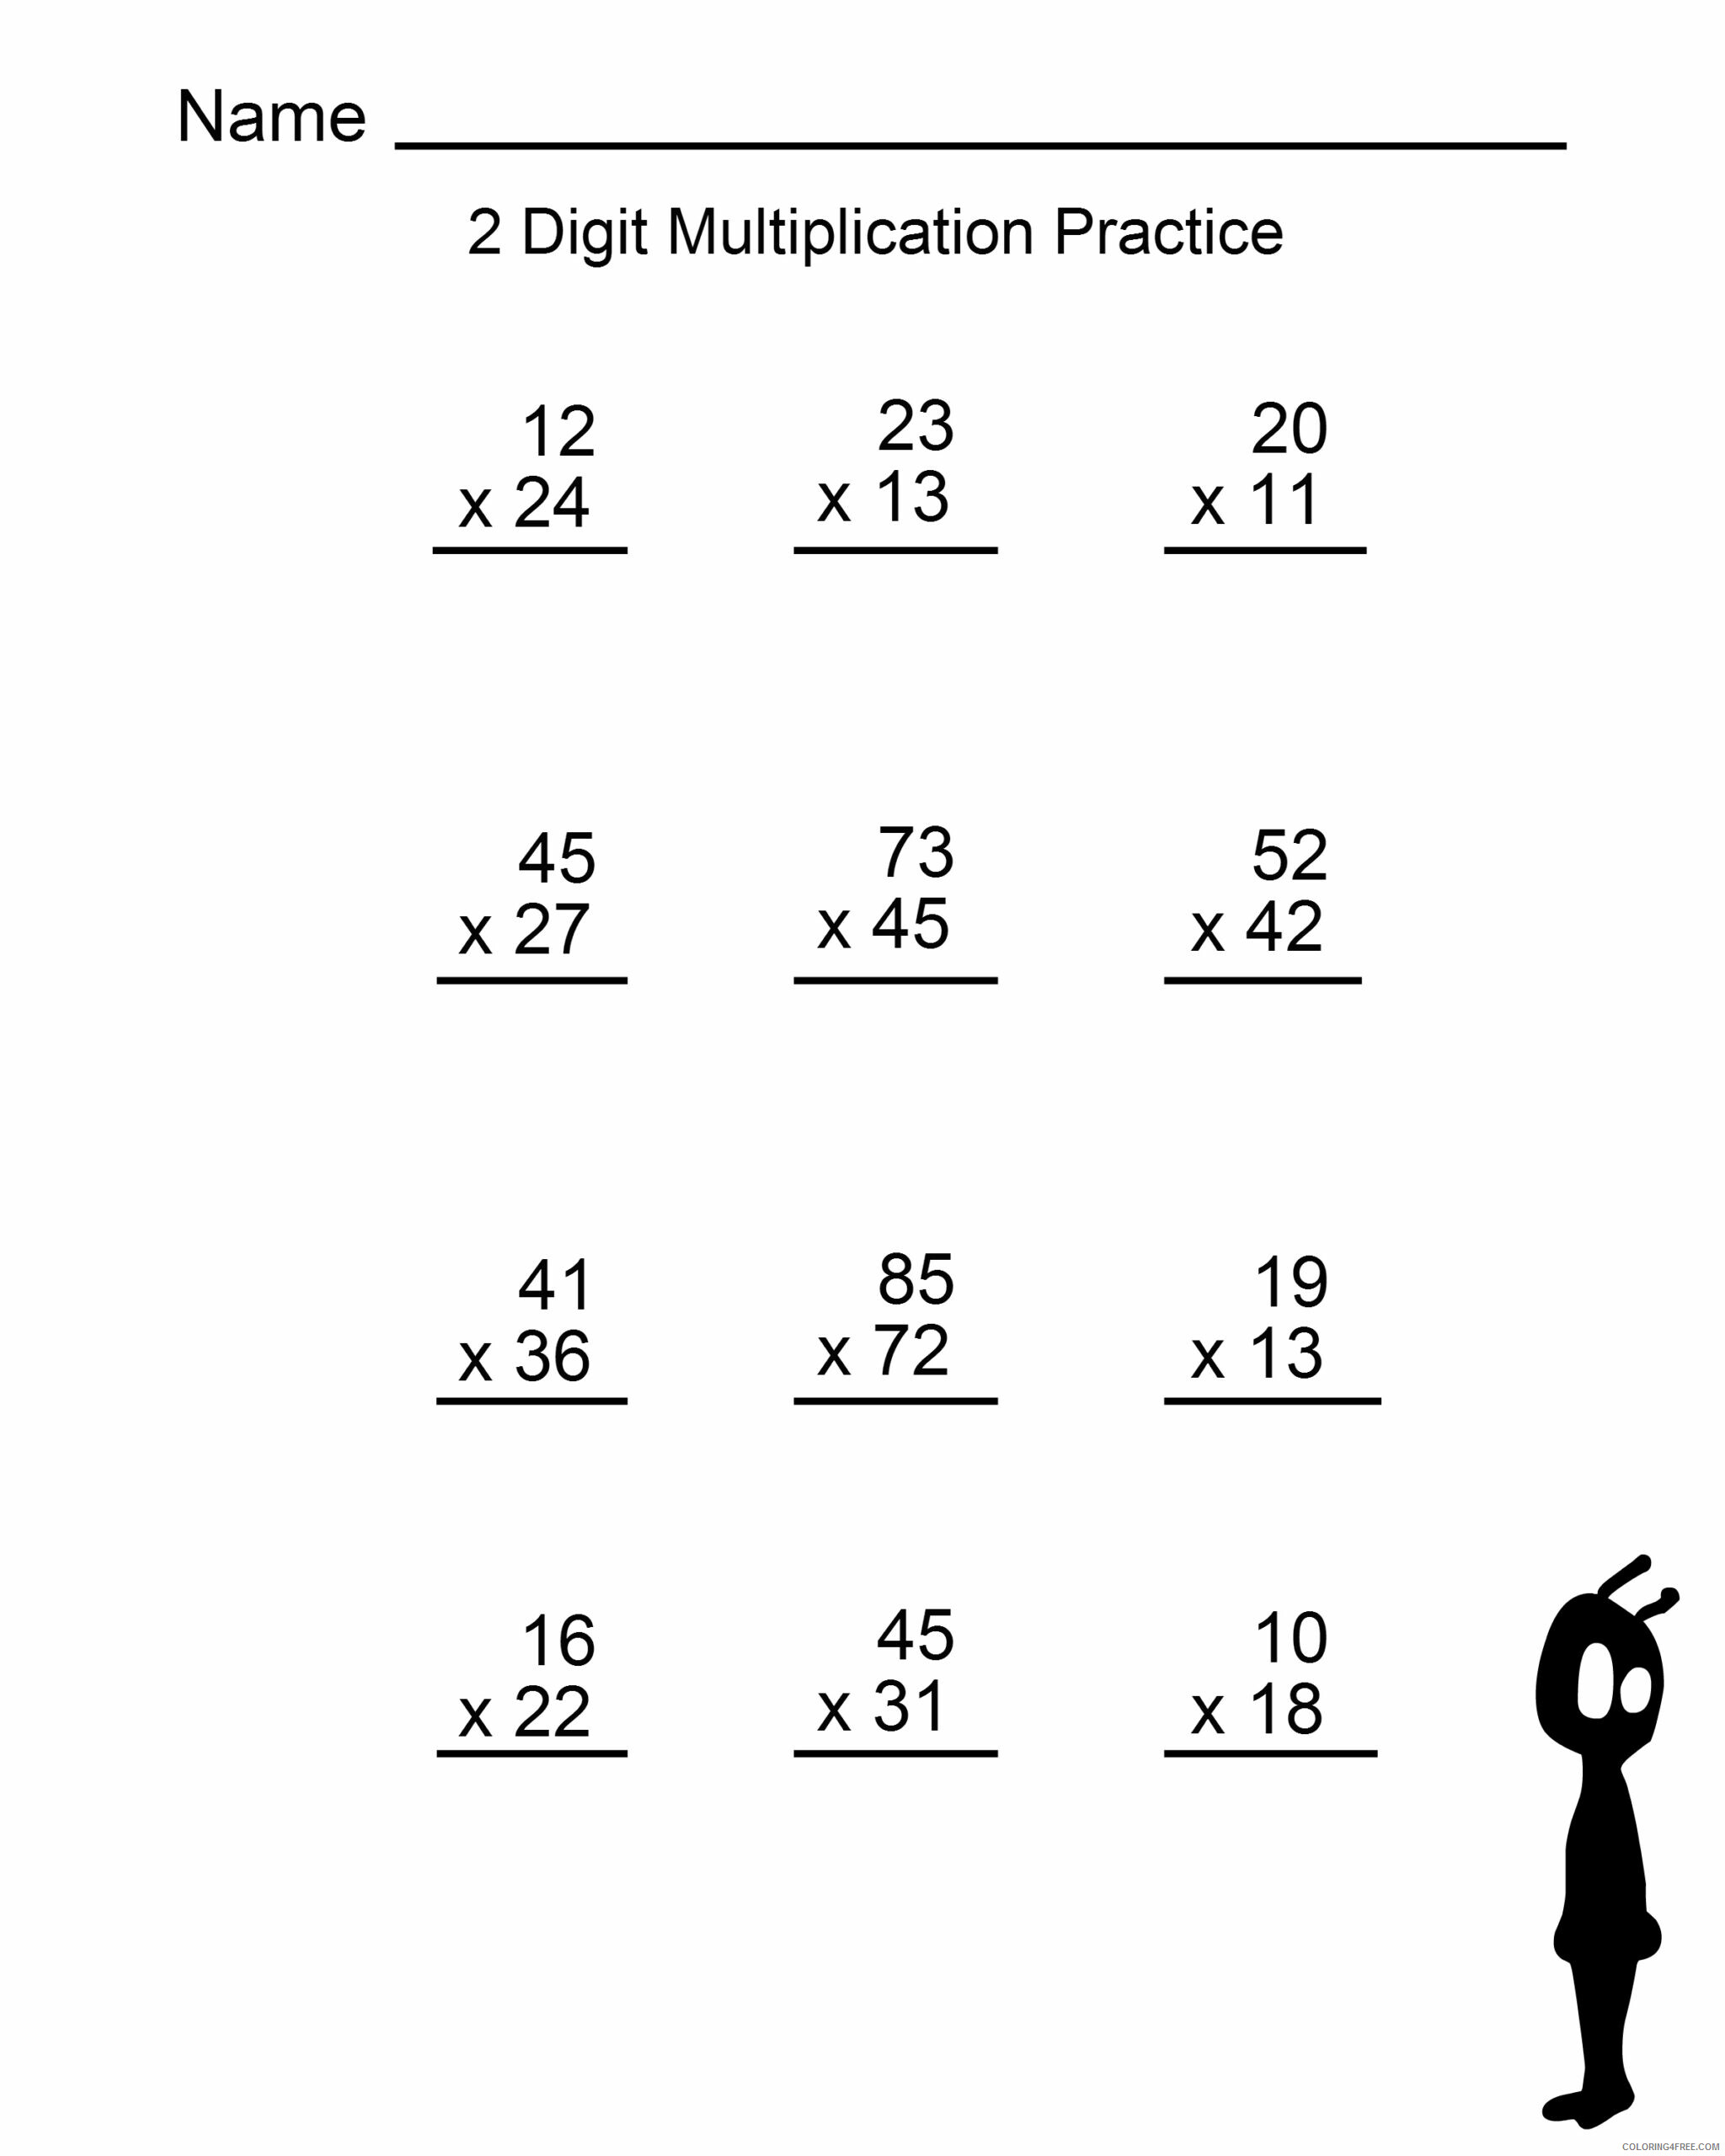 4th Grade Coloring Pages Educational Multiplication Worksheets 2 digit 2020 0359 Coloring4free